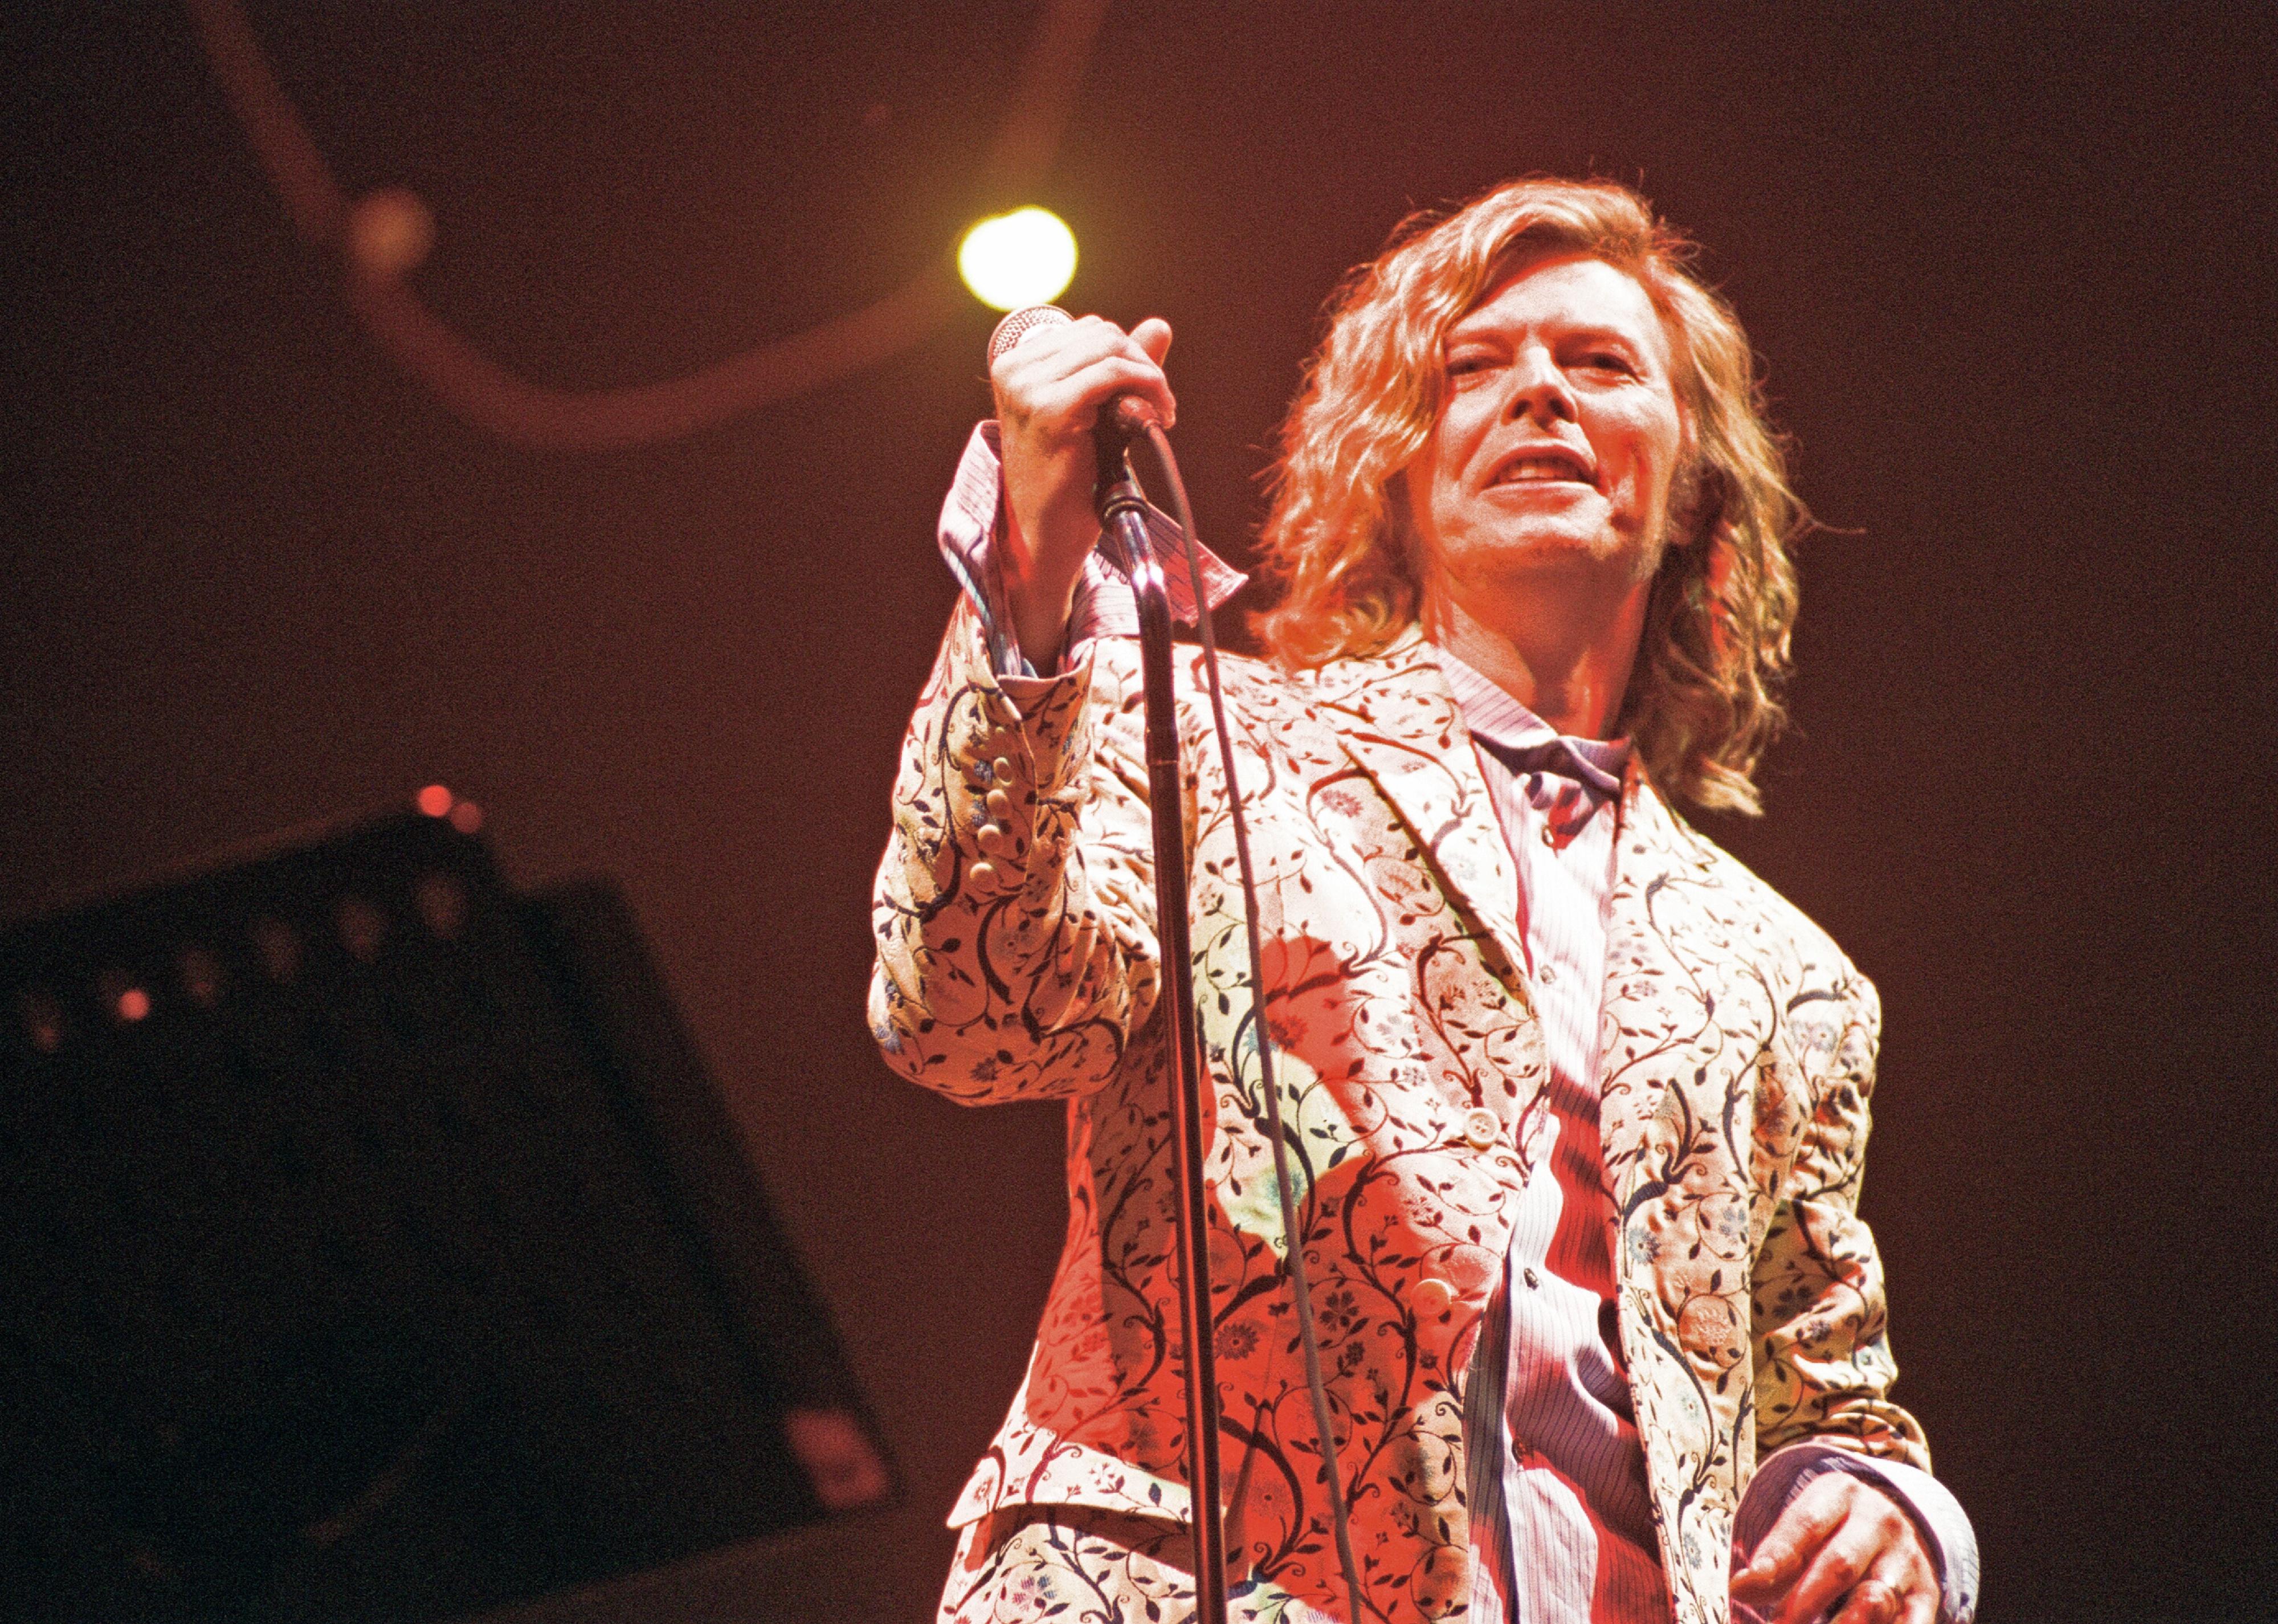 David Bowie performing on the pyramid stage at Glastonbury. 